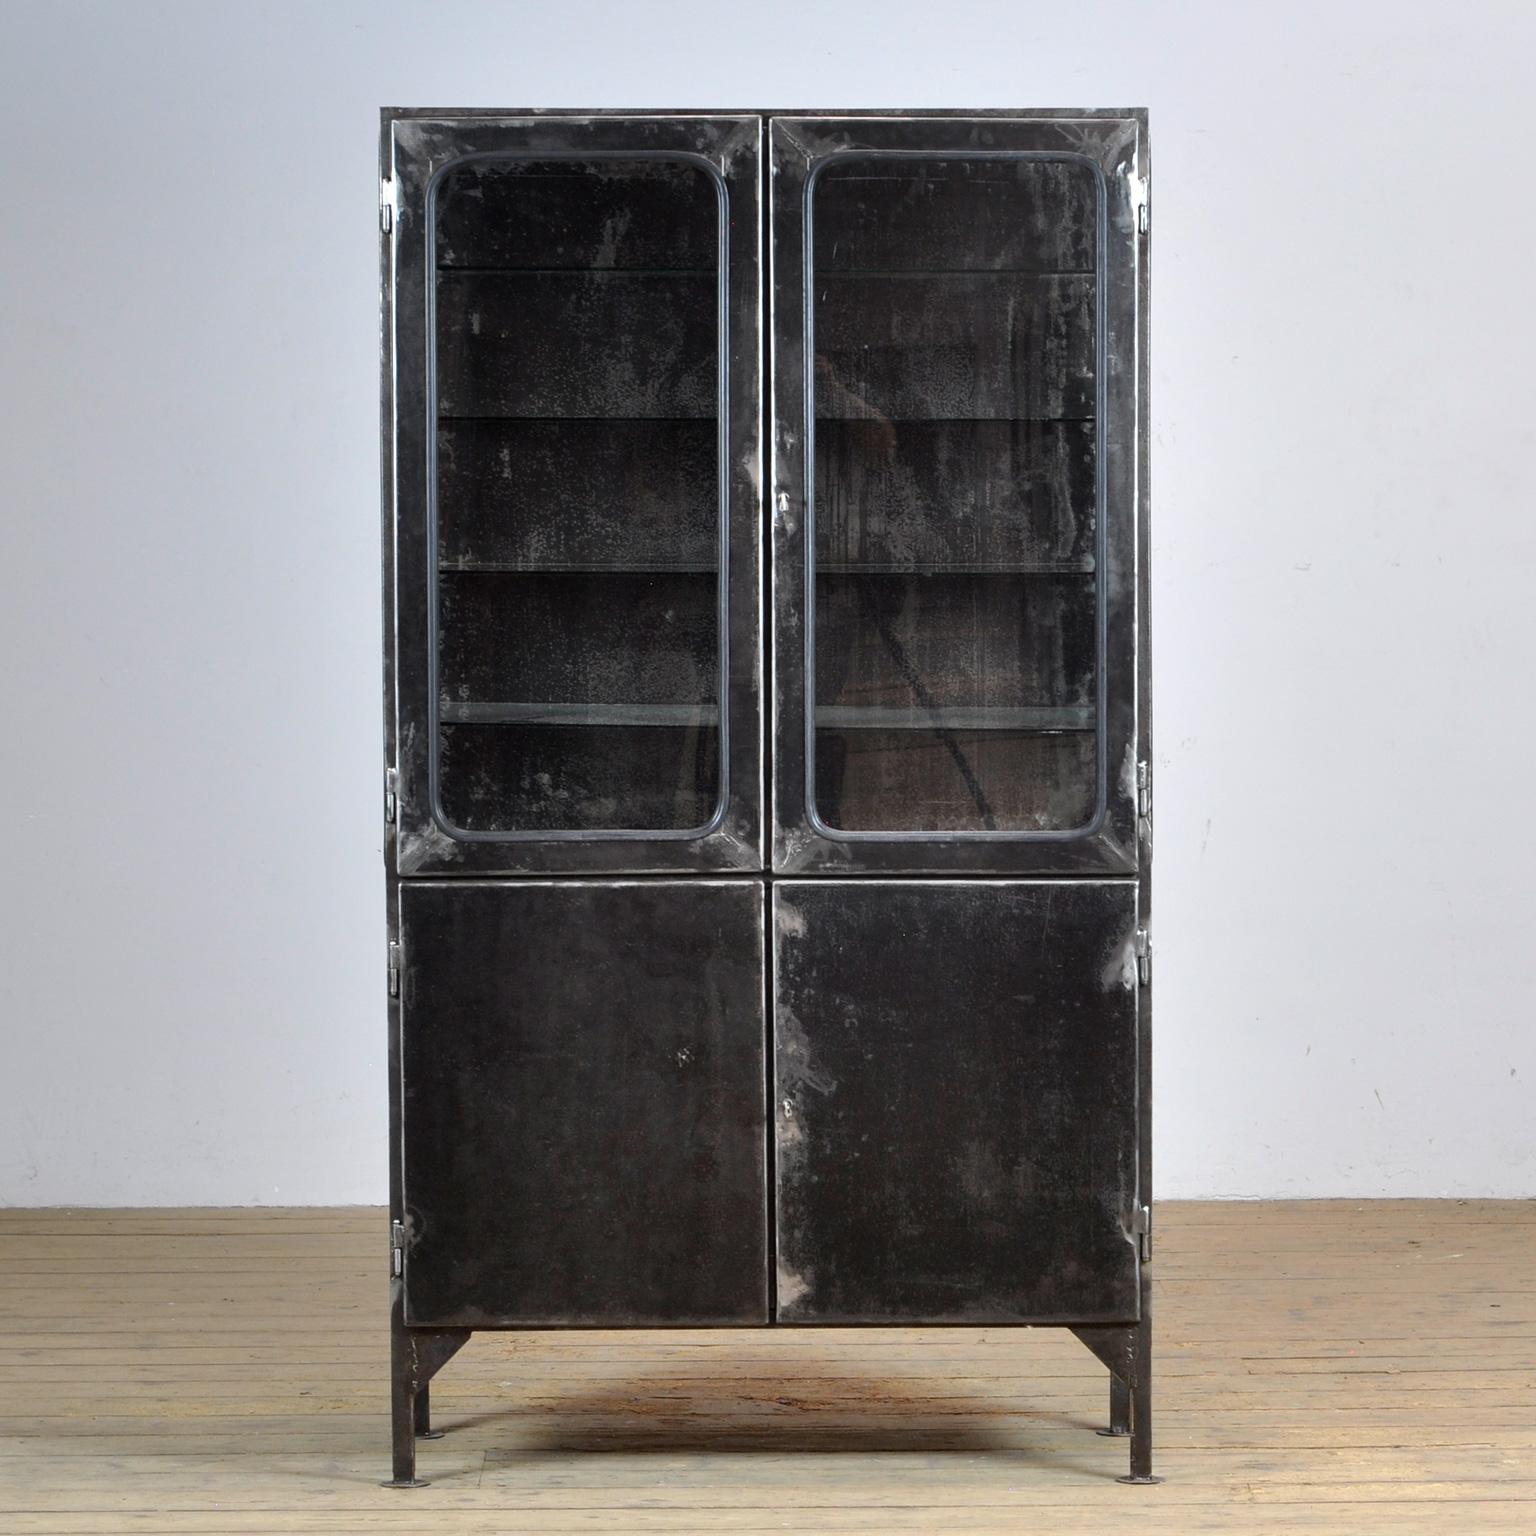 Made of steel and glass that is clamped in the steel by a rubber strip. The cabinet is from the 1970s and was produced in Hungary. The cabinet has been stripped to the metal and finished with a transparent lacquer. The cabinet comes with 4 glass